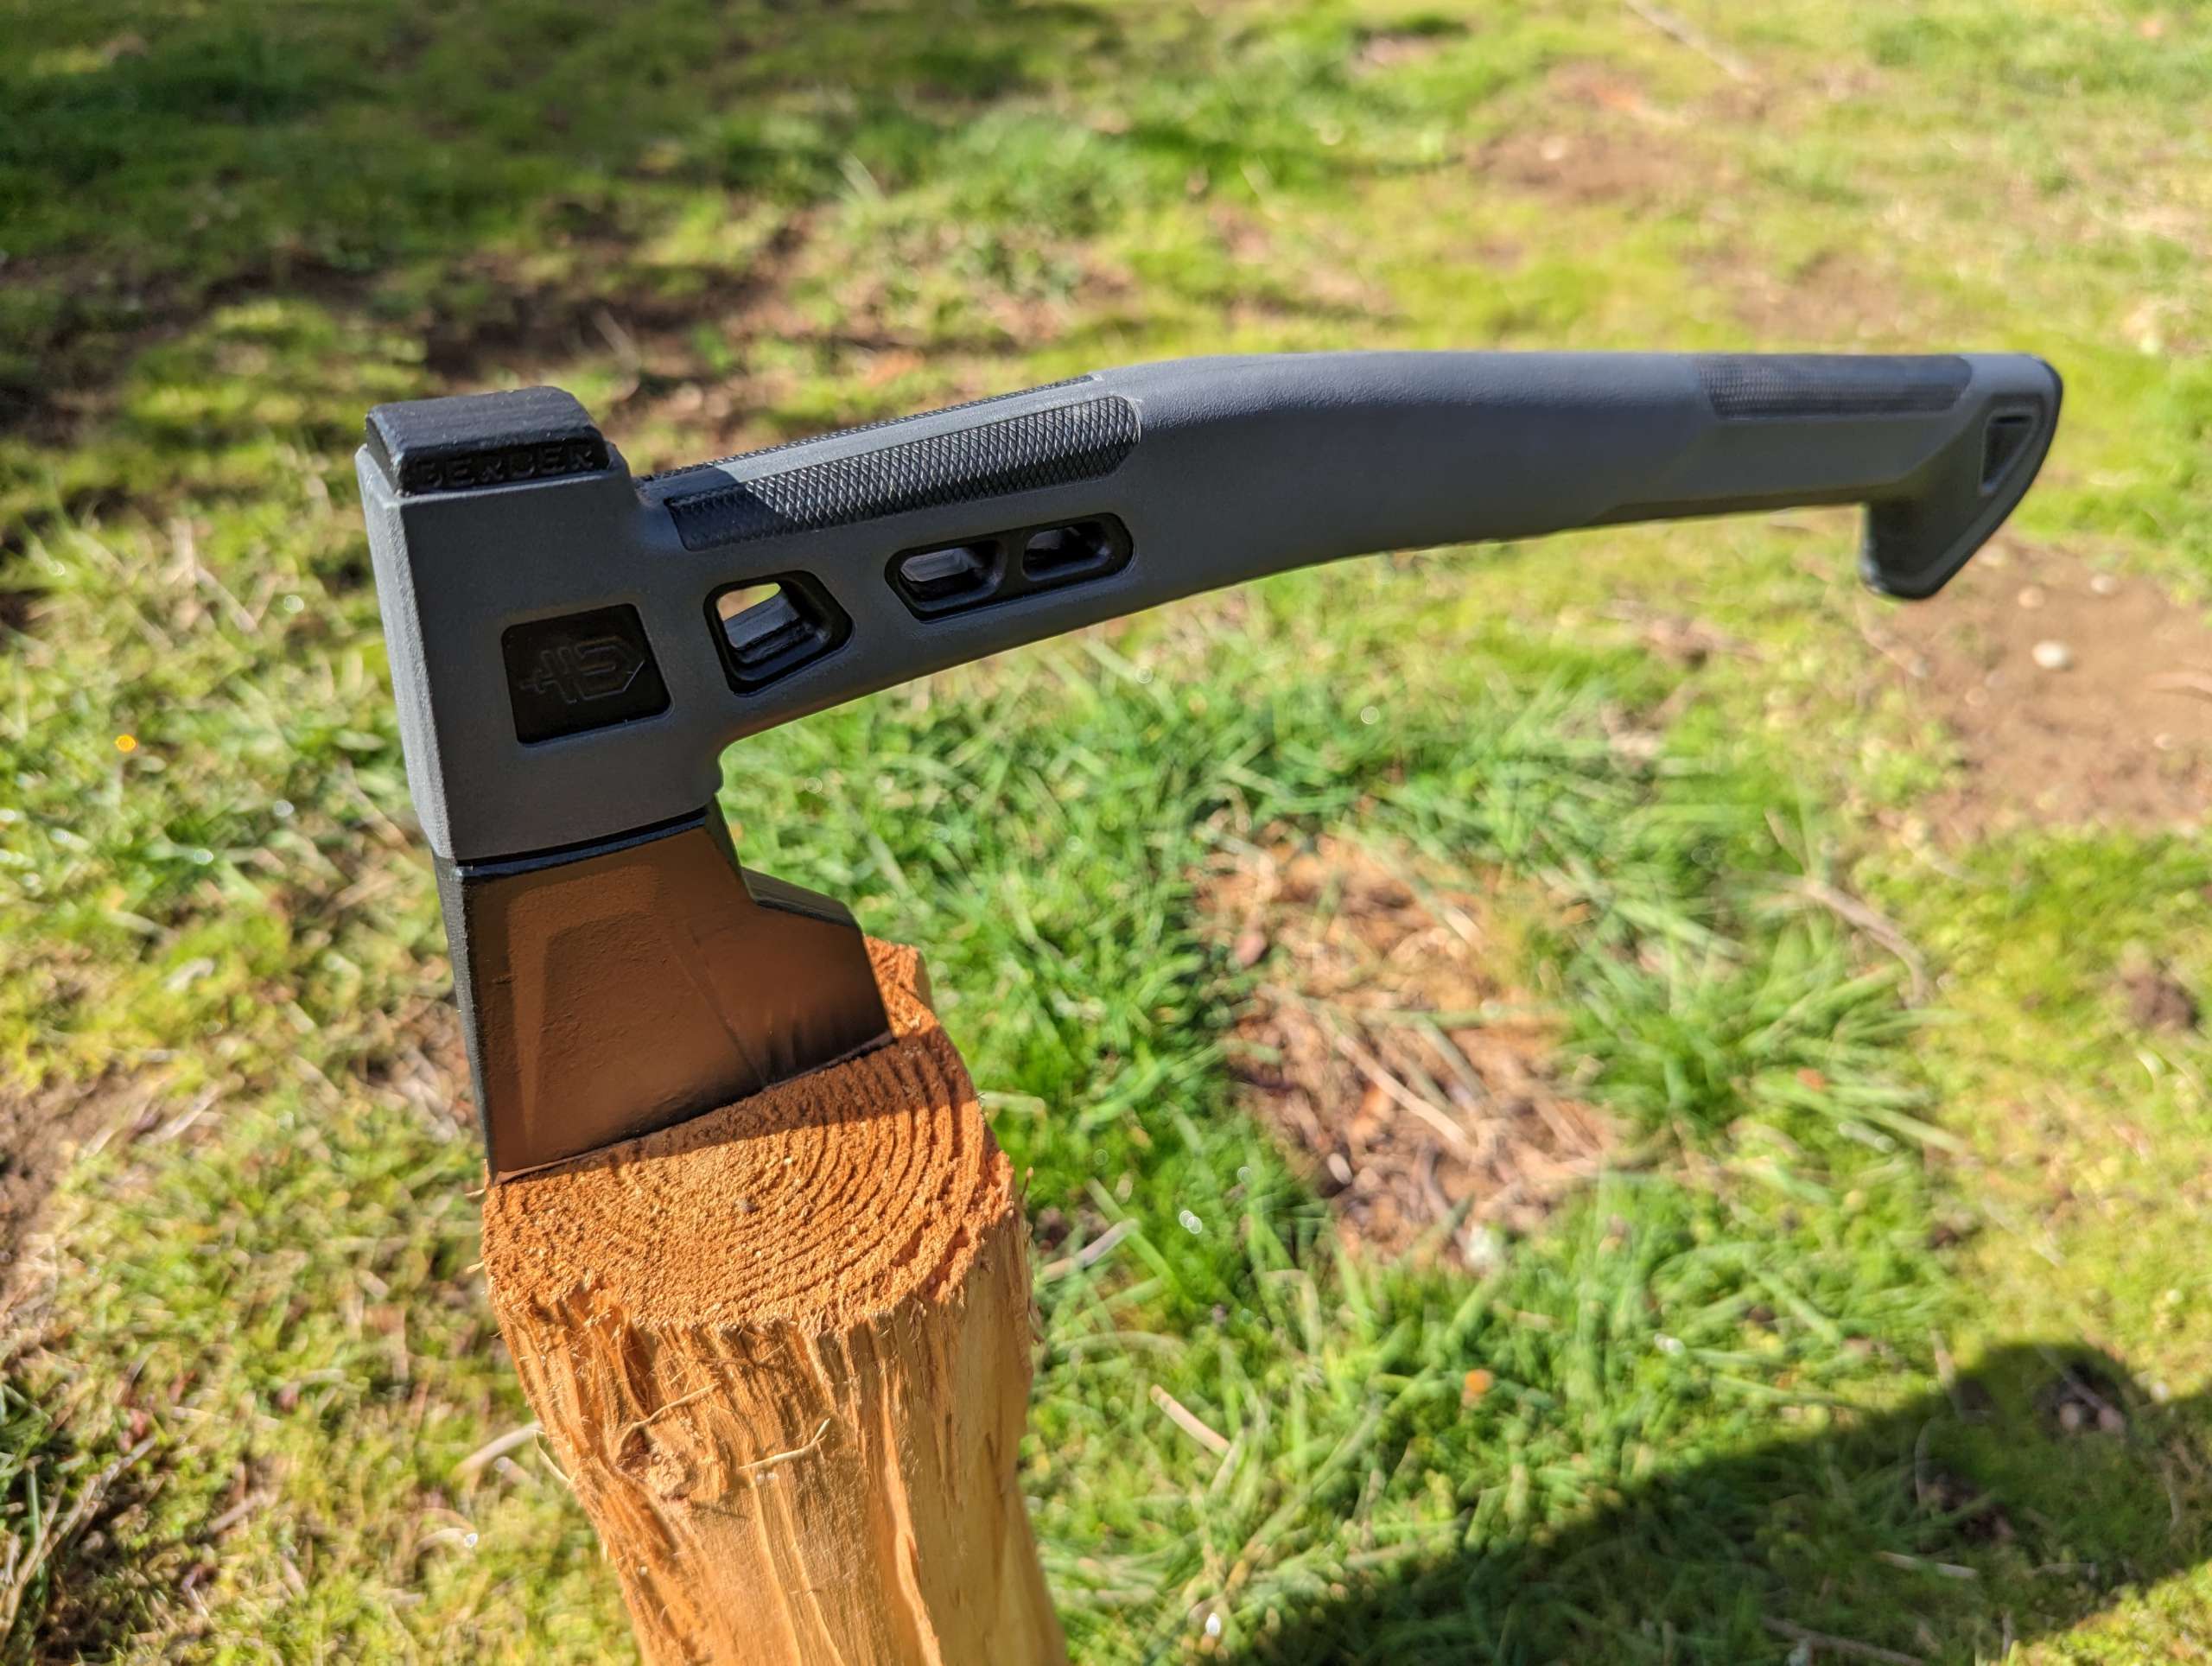 Gerber Bushcraft Hatchet review - How much wood could this wood